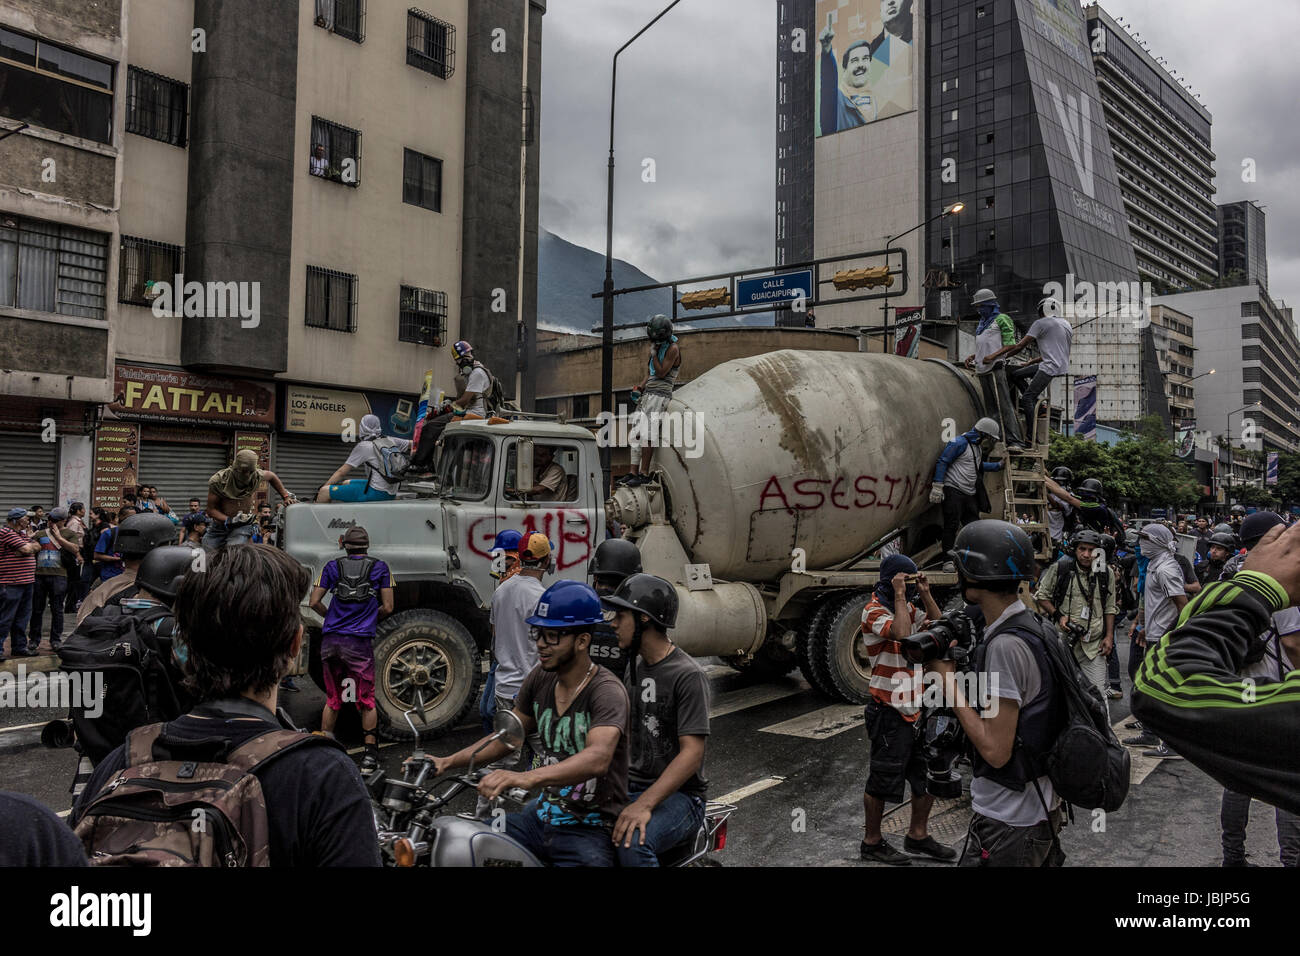 Protesters use cement mixer to lock up the National Guard (GNB). An anti-government demonstrator is carried to safety during clashes with authorities  Stock Photo